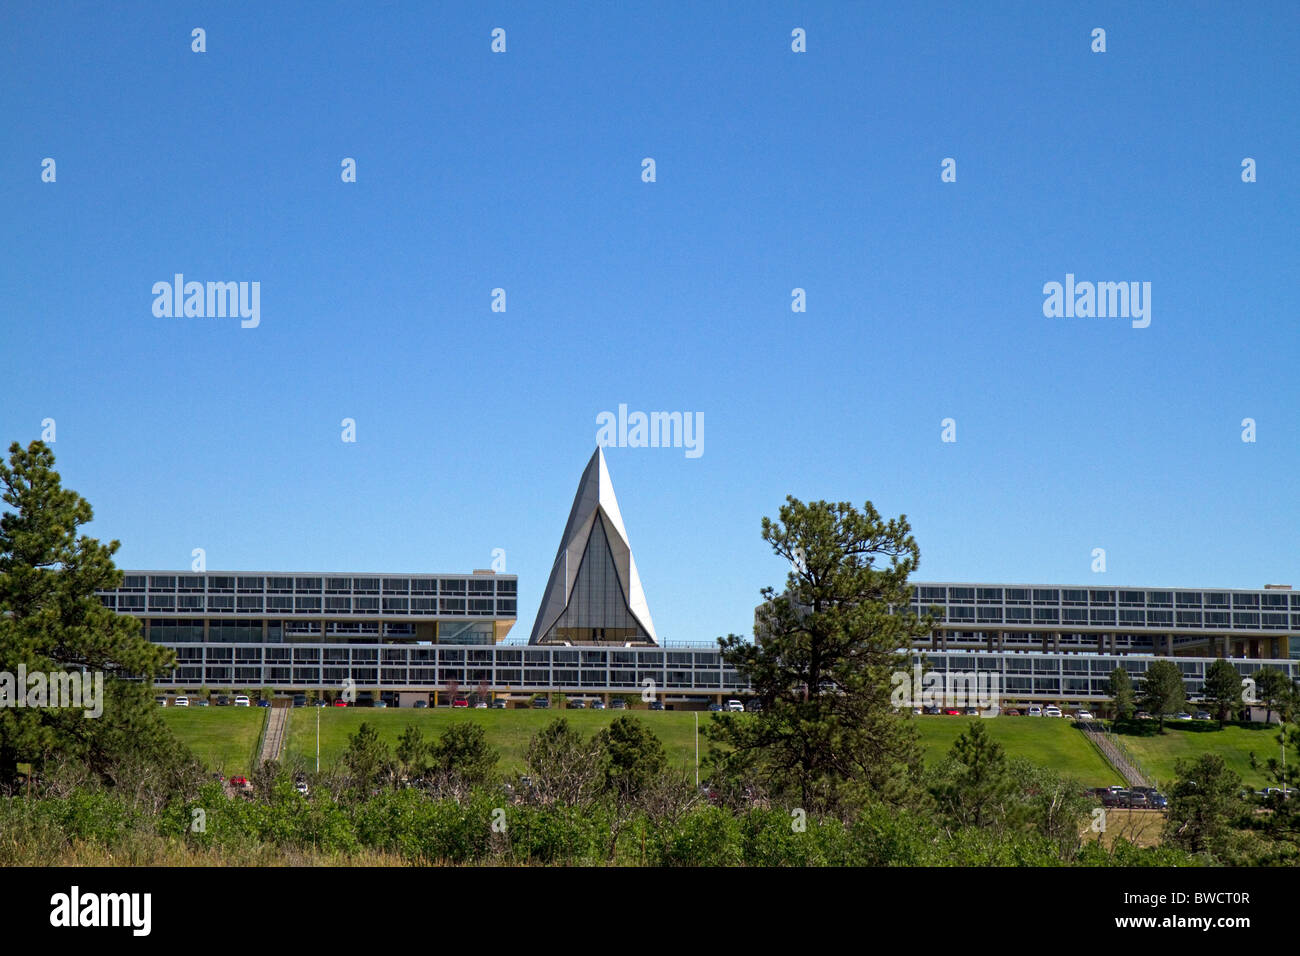 United States Air Force Academy located in Colorado Springs, Colorado, USA. Stock Photo